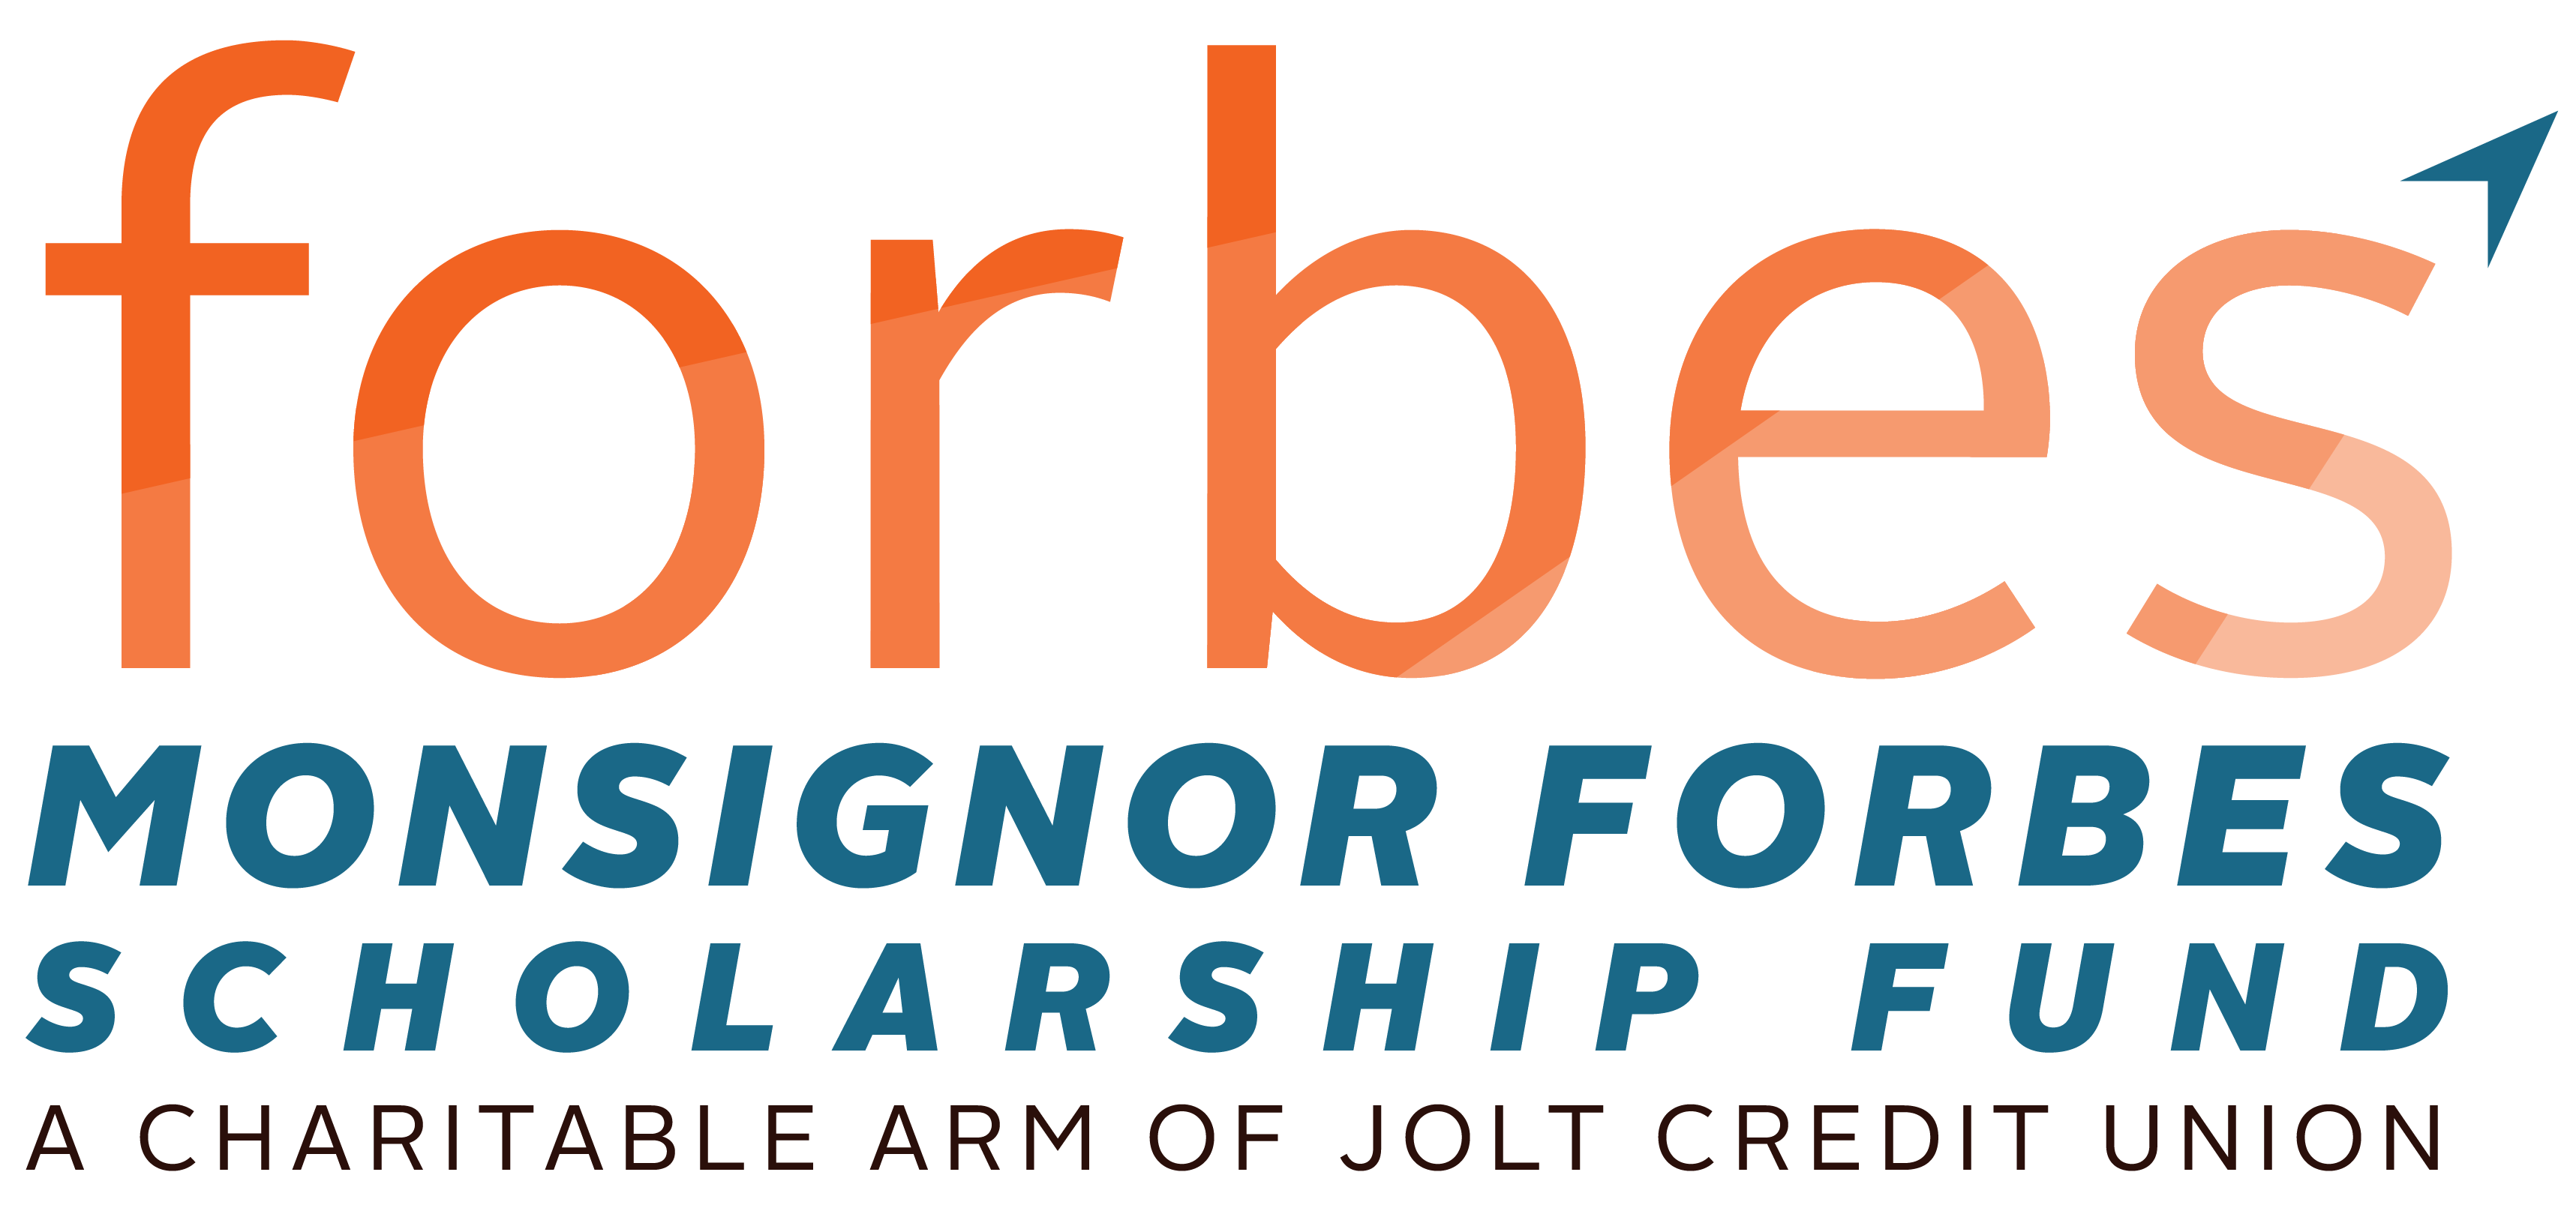 Forbes. Monsignor Forbes Scholarship Fund. A Charitable Arm of Jolt Credit Union